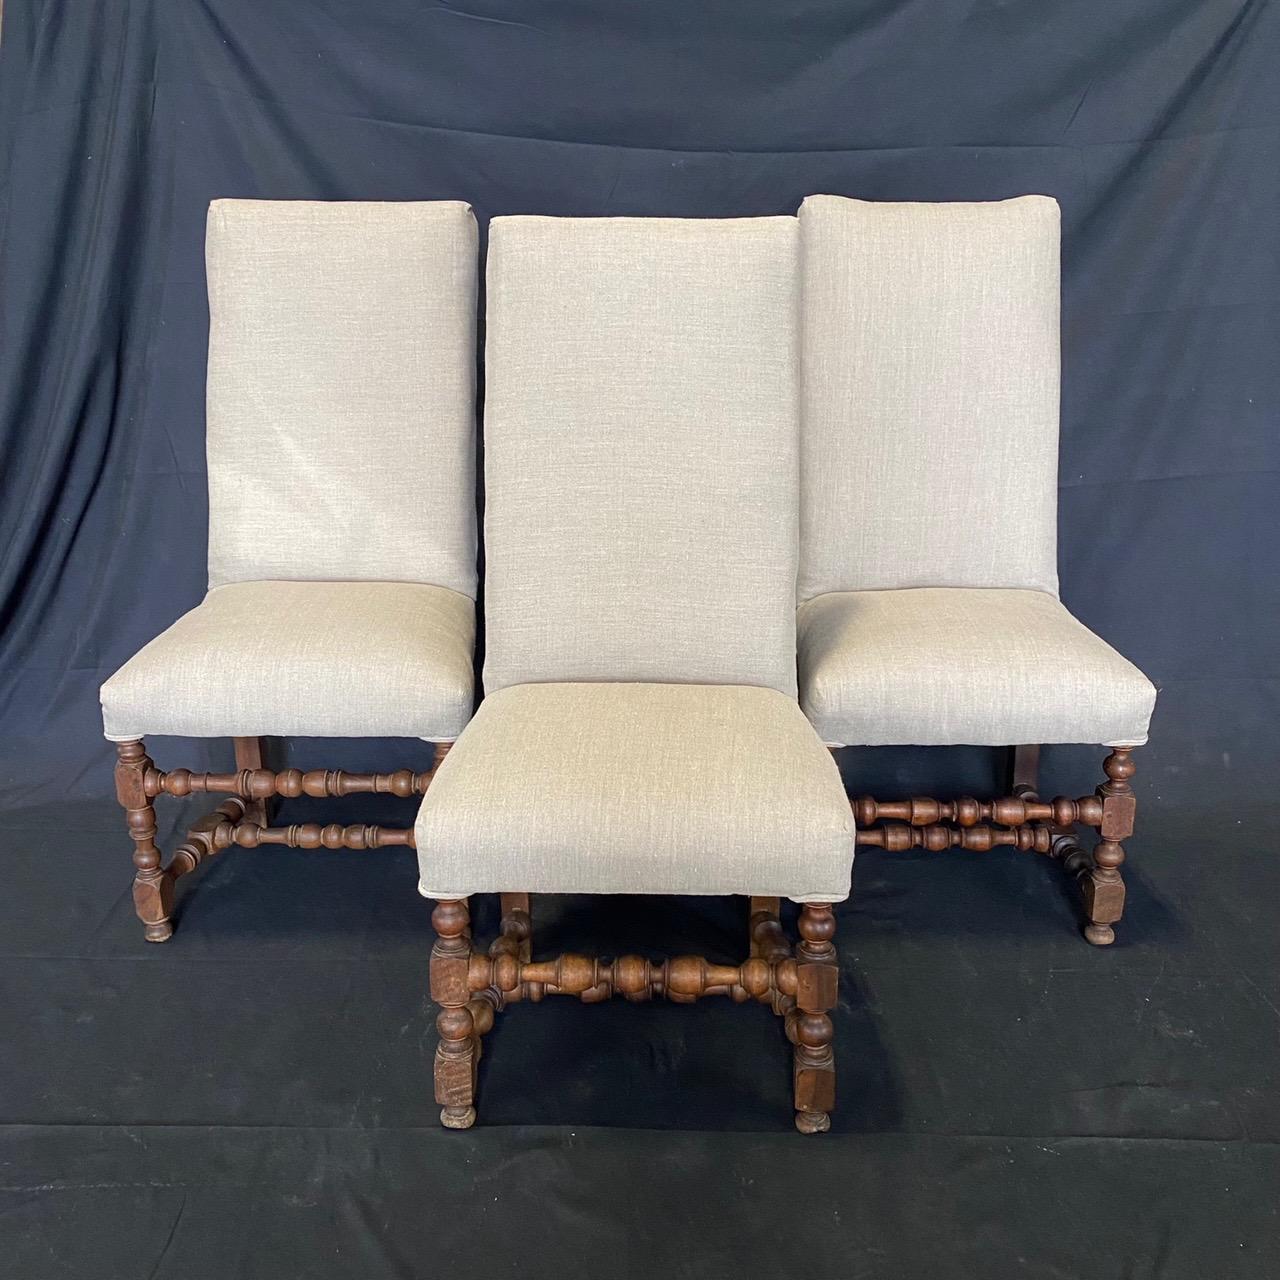  Set of Early French Louis XIII Chairs with Intricate Turnery and New Upholstery 6